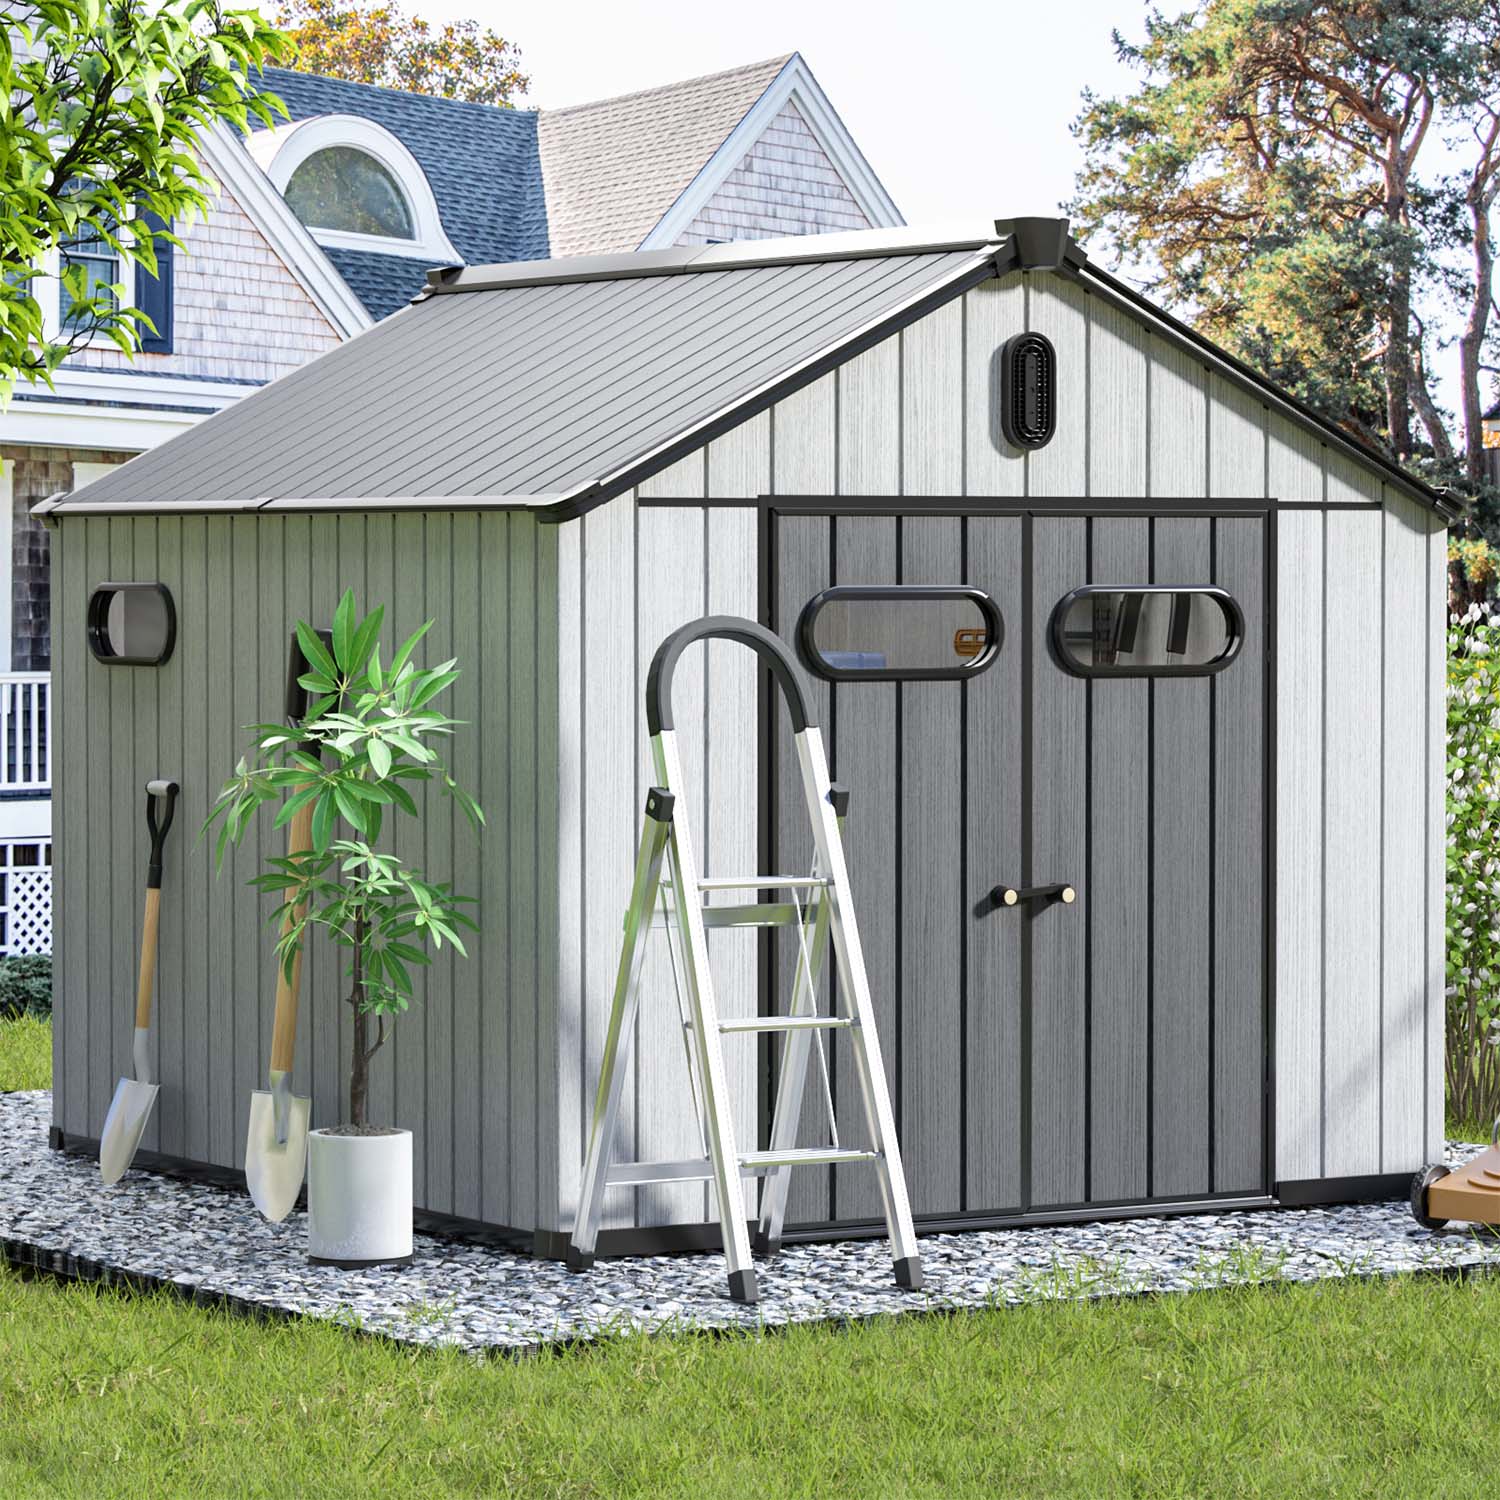 8' x 10'  Resin Tool Shed, Polypropylene Storage Shed with Lockable Doors, Floor Included, Grey